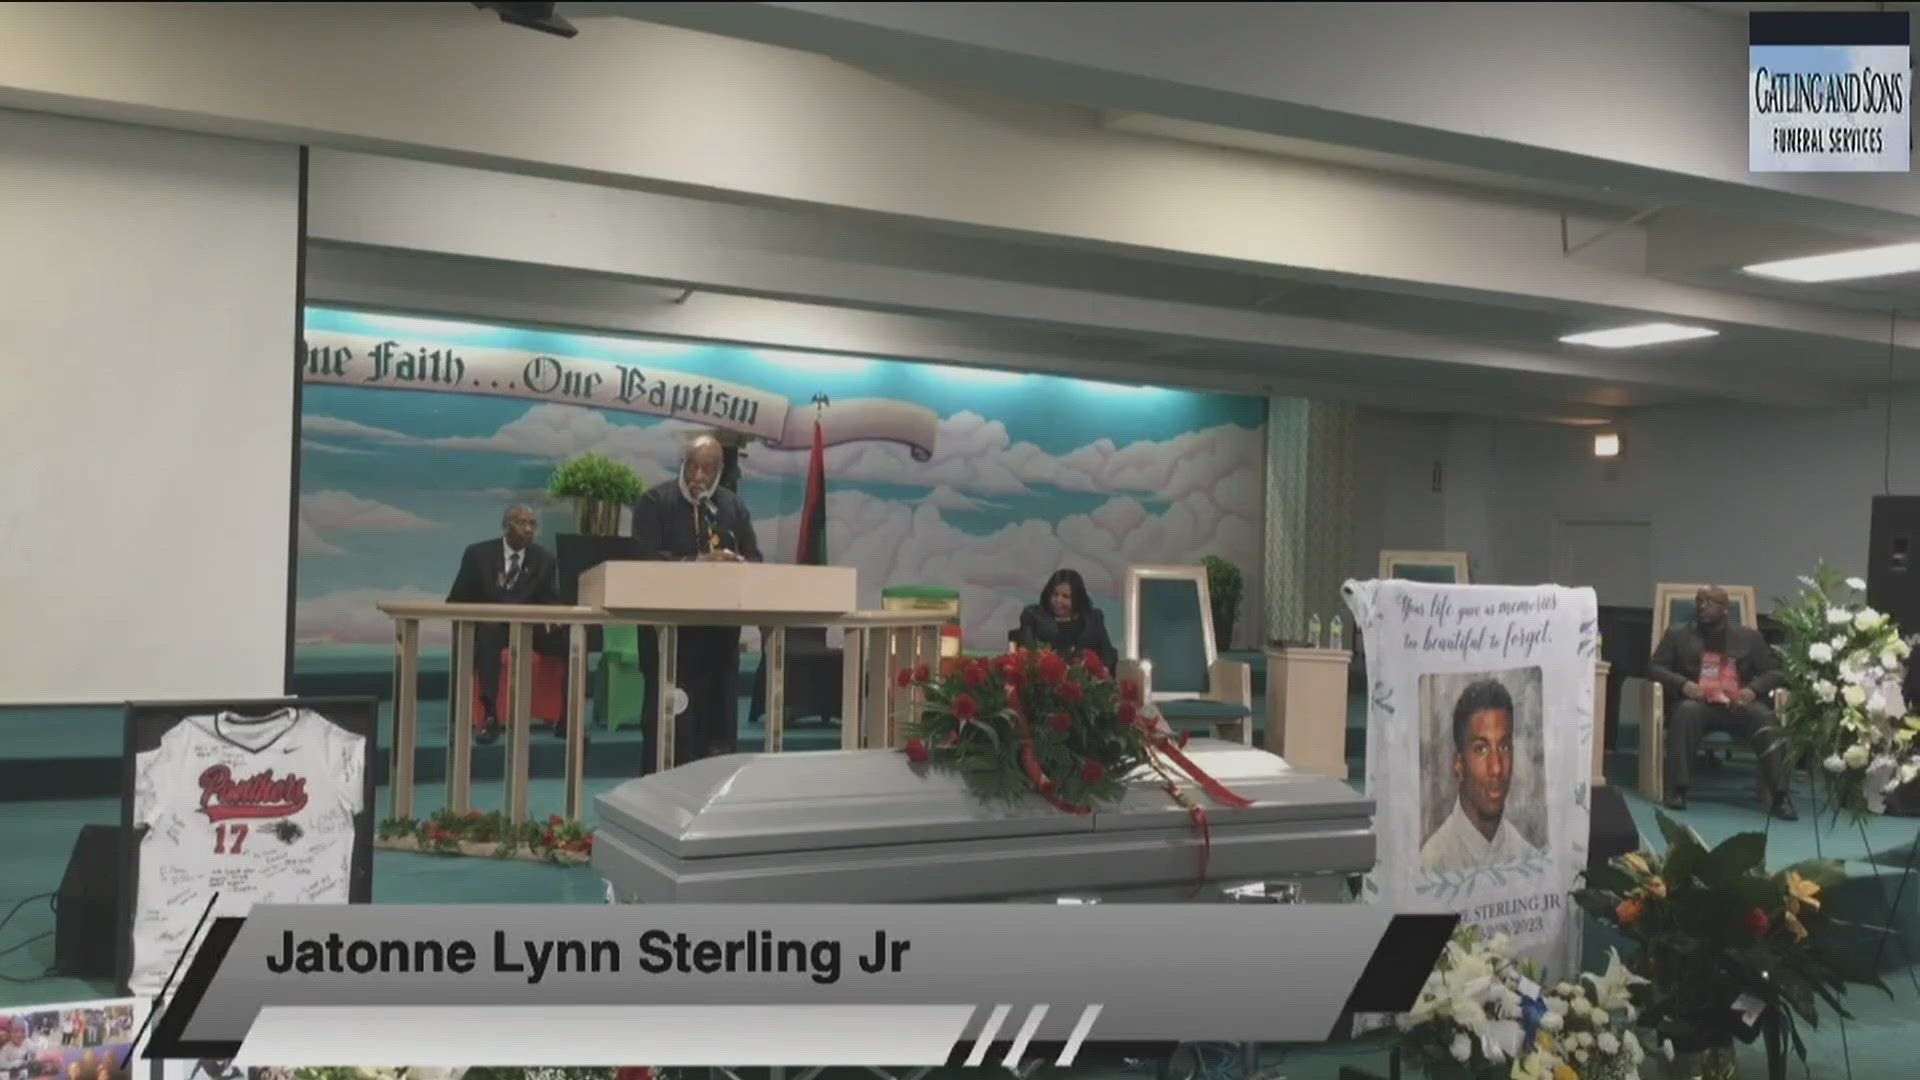 Family members of Jatonne Sterling held the service at the Apostolic Assembly Church in Chicago.